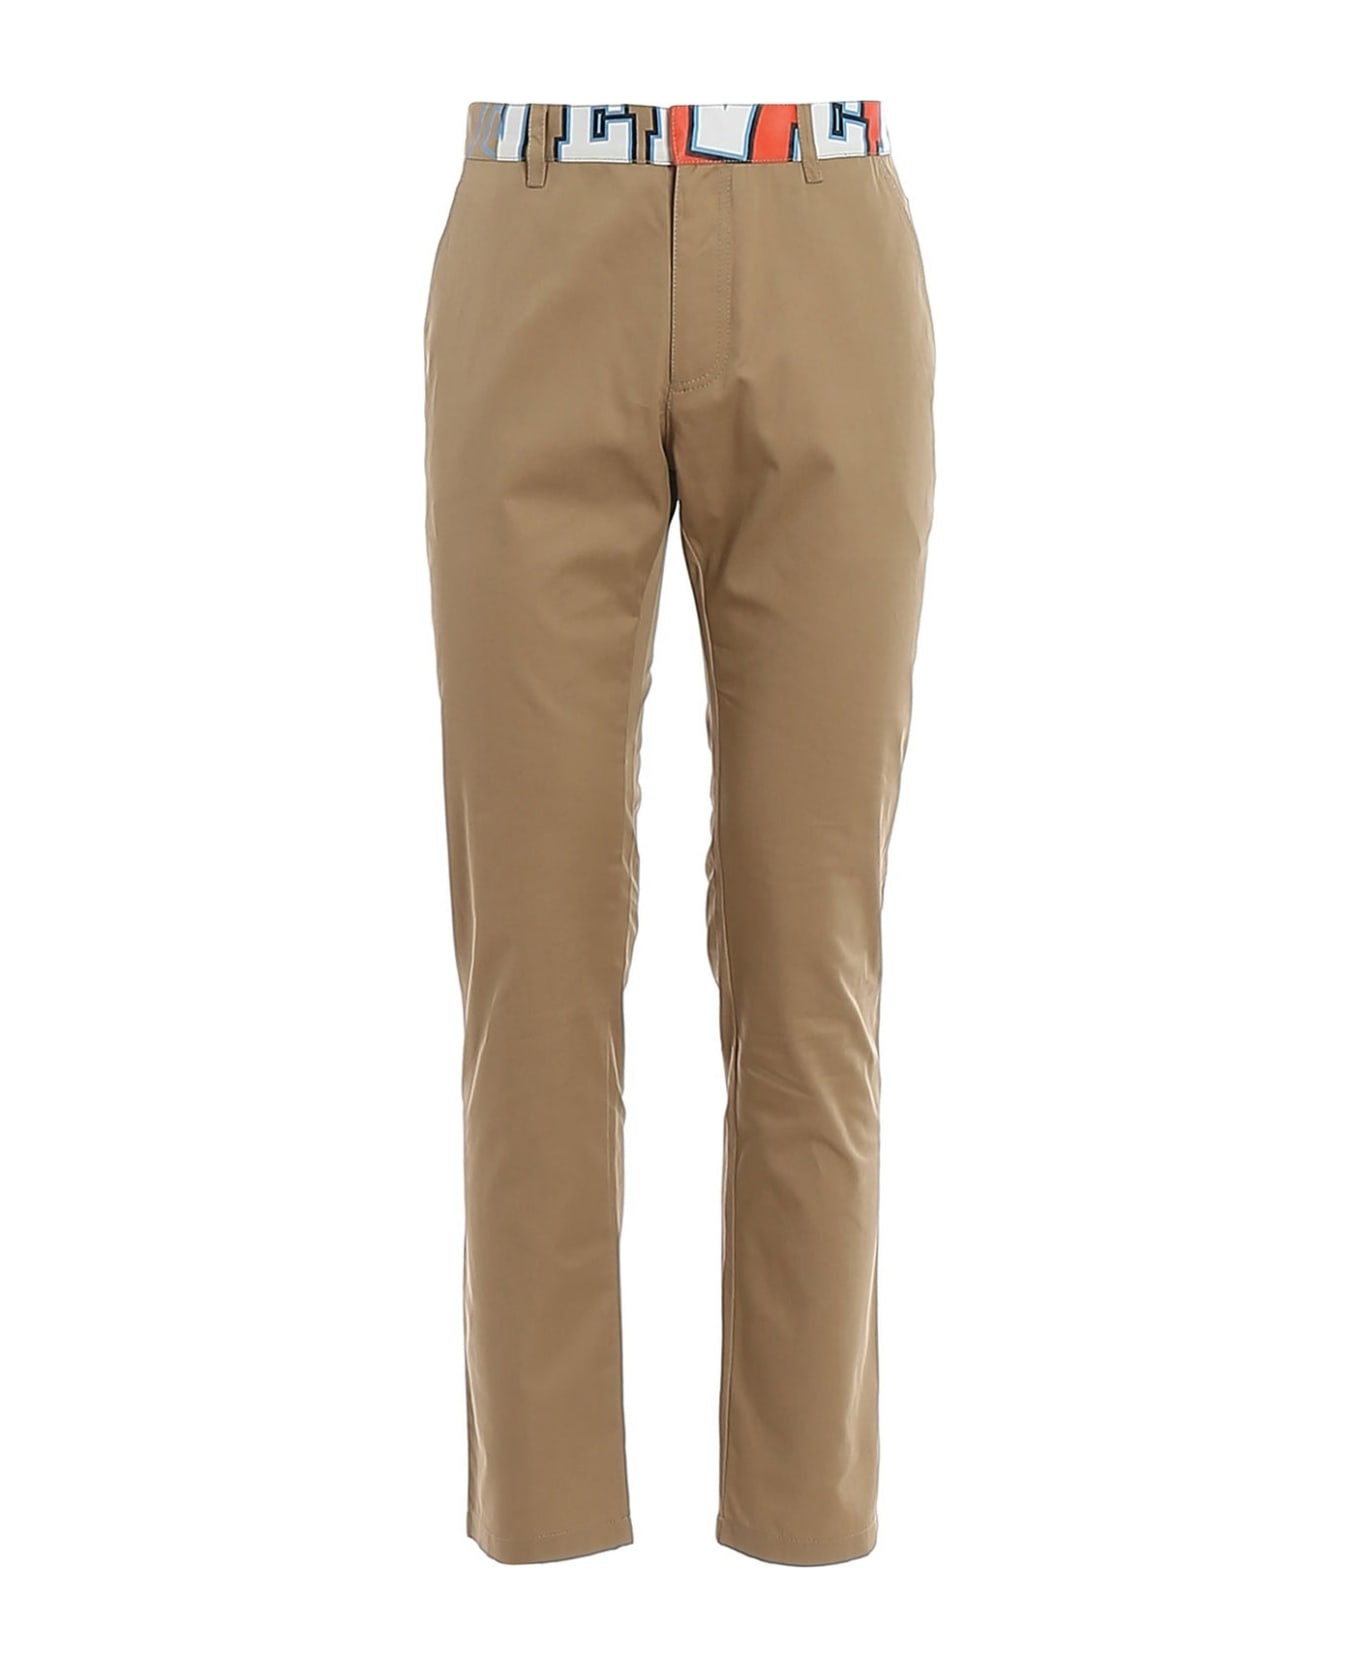 Versace Compilation Chino Trousers - Beige